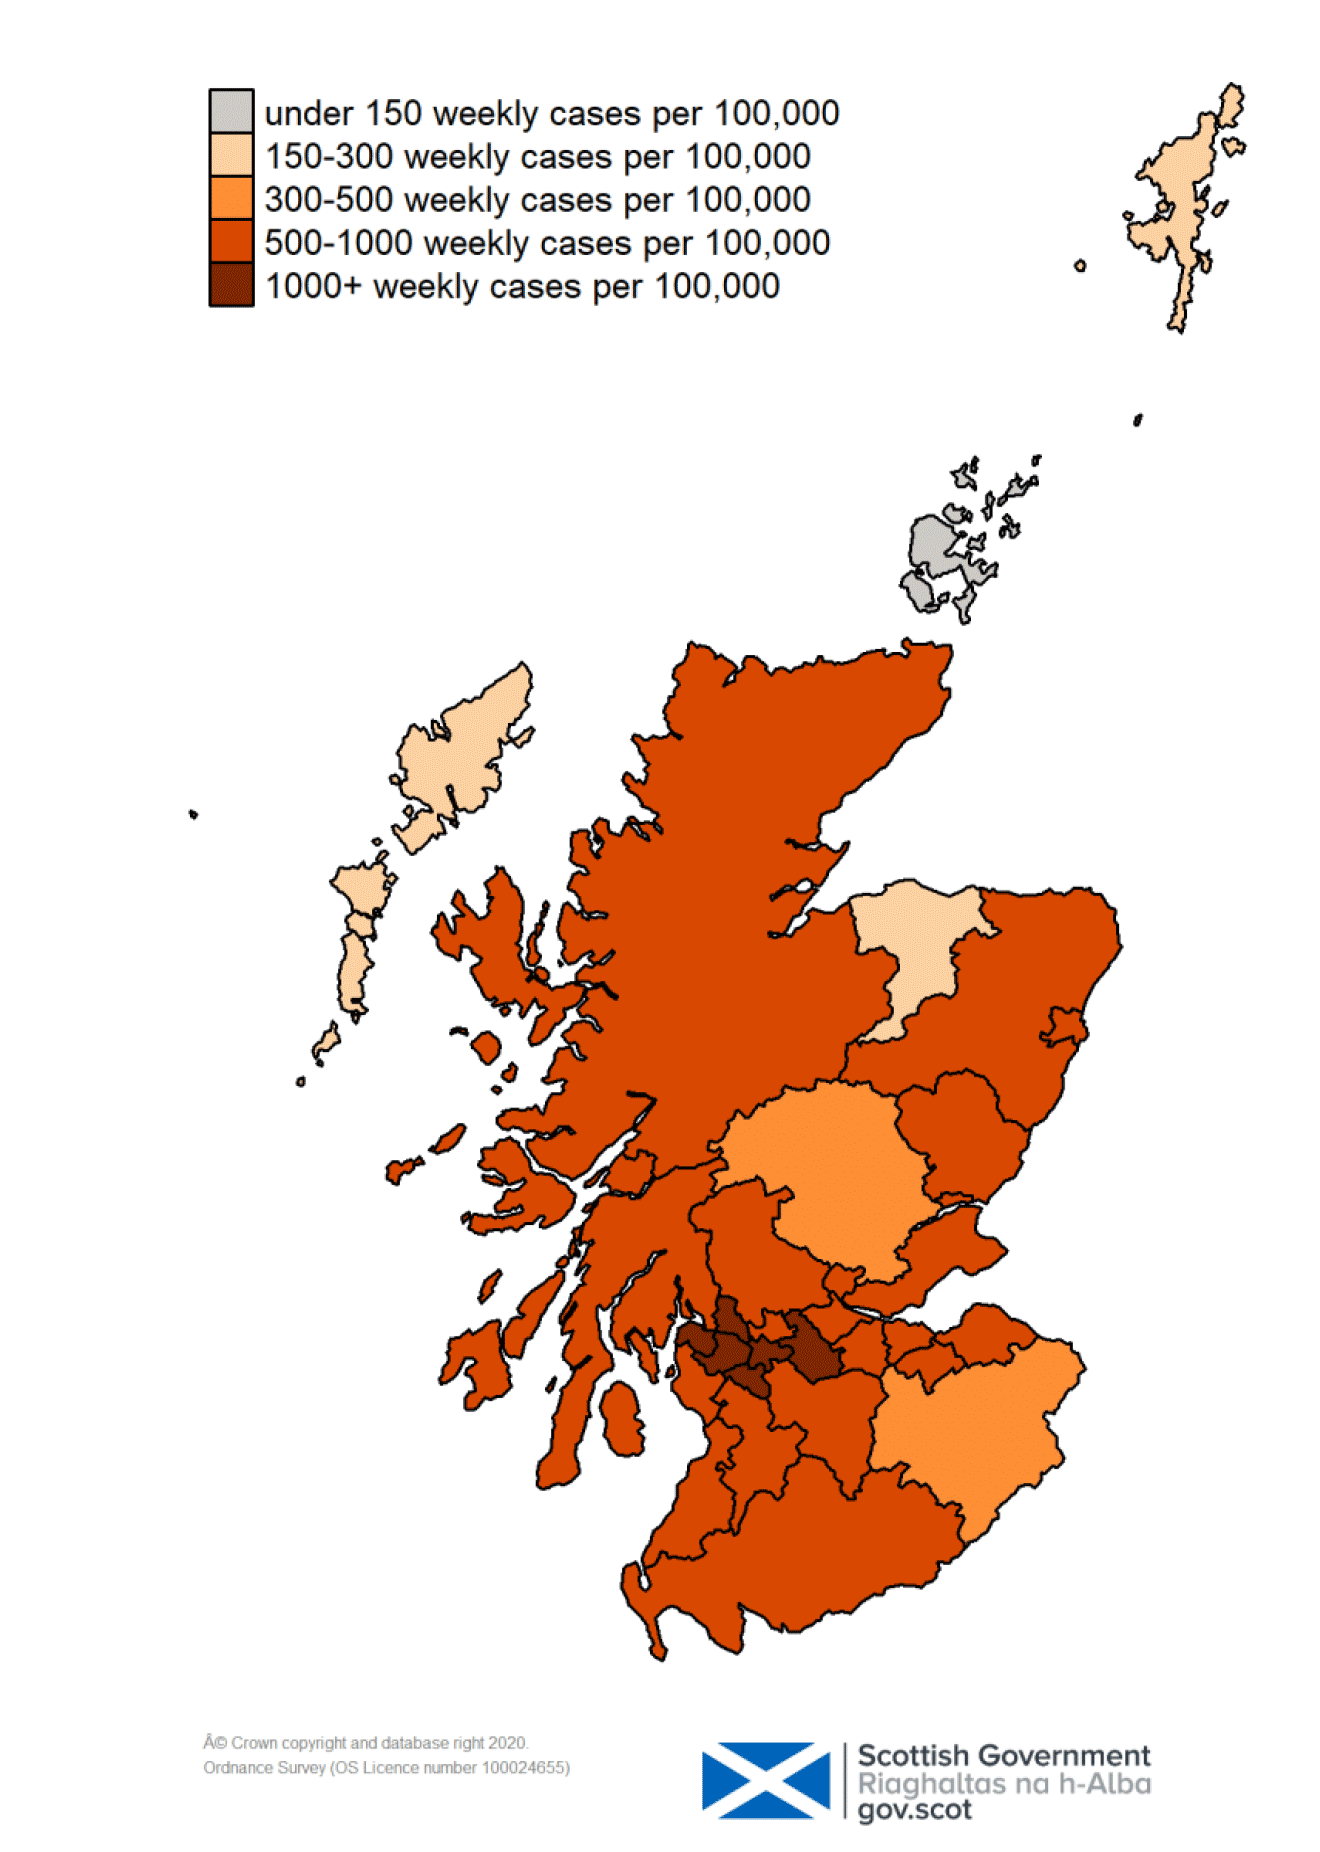 This colour coded map of Scotland shows the different rates of weekly positive cases per 100,000 people across Scotland’s Local Authorities. The colours range from grey for under 150 weekly cases per 100,000, through very light orange for 150 to 300, orange for 300-500, darker orange for 500-1,000, and very dark orange for over 1,000 weekly cases per 100,000 people. 
Six local authorities are showing as very dark orange on the map, with over 1,000 weekly cases. These are East Renfrewshire, Glasgow City, Inverclyde, North Lanarkshire, Renfrewshire and West Dunbartonshire. The Orkney Islands are shown as grey, with under 150 weekly cases per 100,000 people. Moray, Na h-Eileanan Siar and Shetland are showing as very light orange with 150-300 weekly cases. Perth and Kinross and Scottish Borders are showing as orange with 300-500 weekly cases per 100,000 people. All other local authorities are shown as darker orange with 500-1,000 weekly cases per 100,000.
